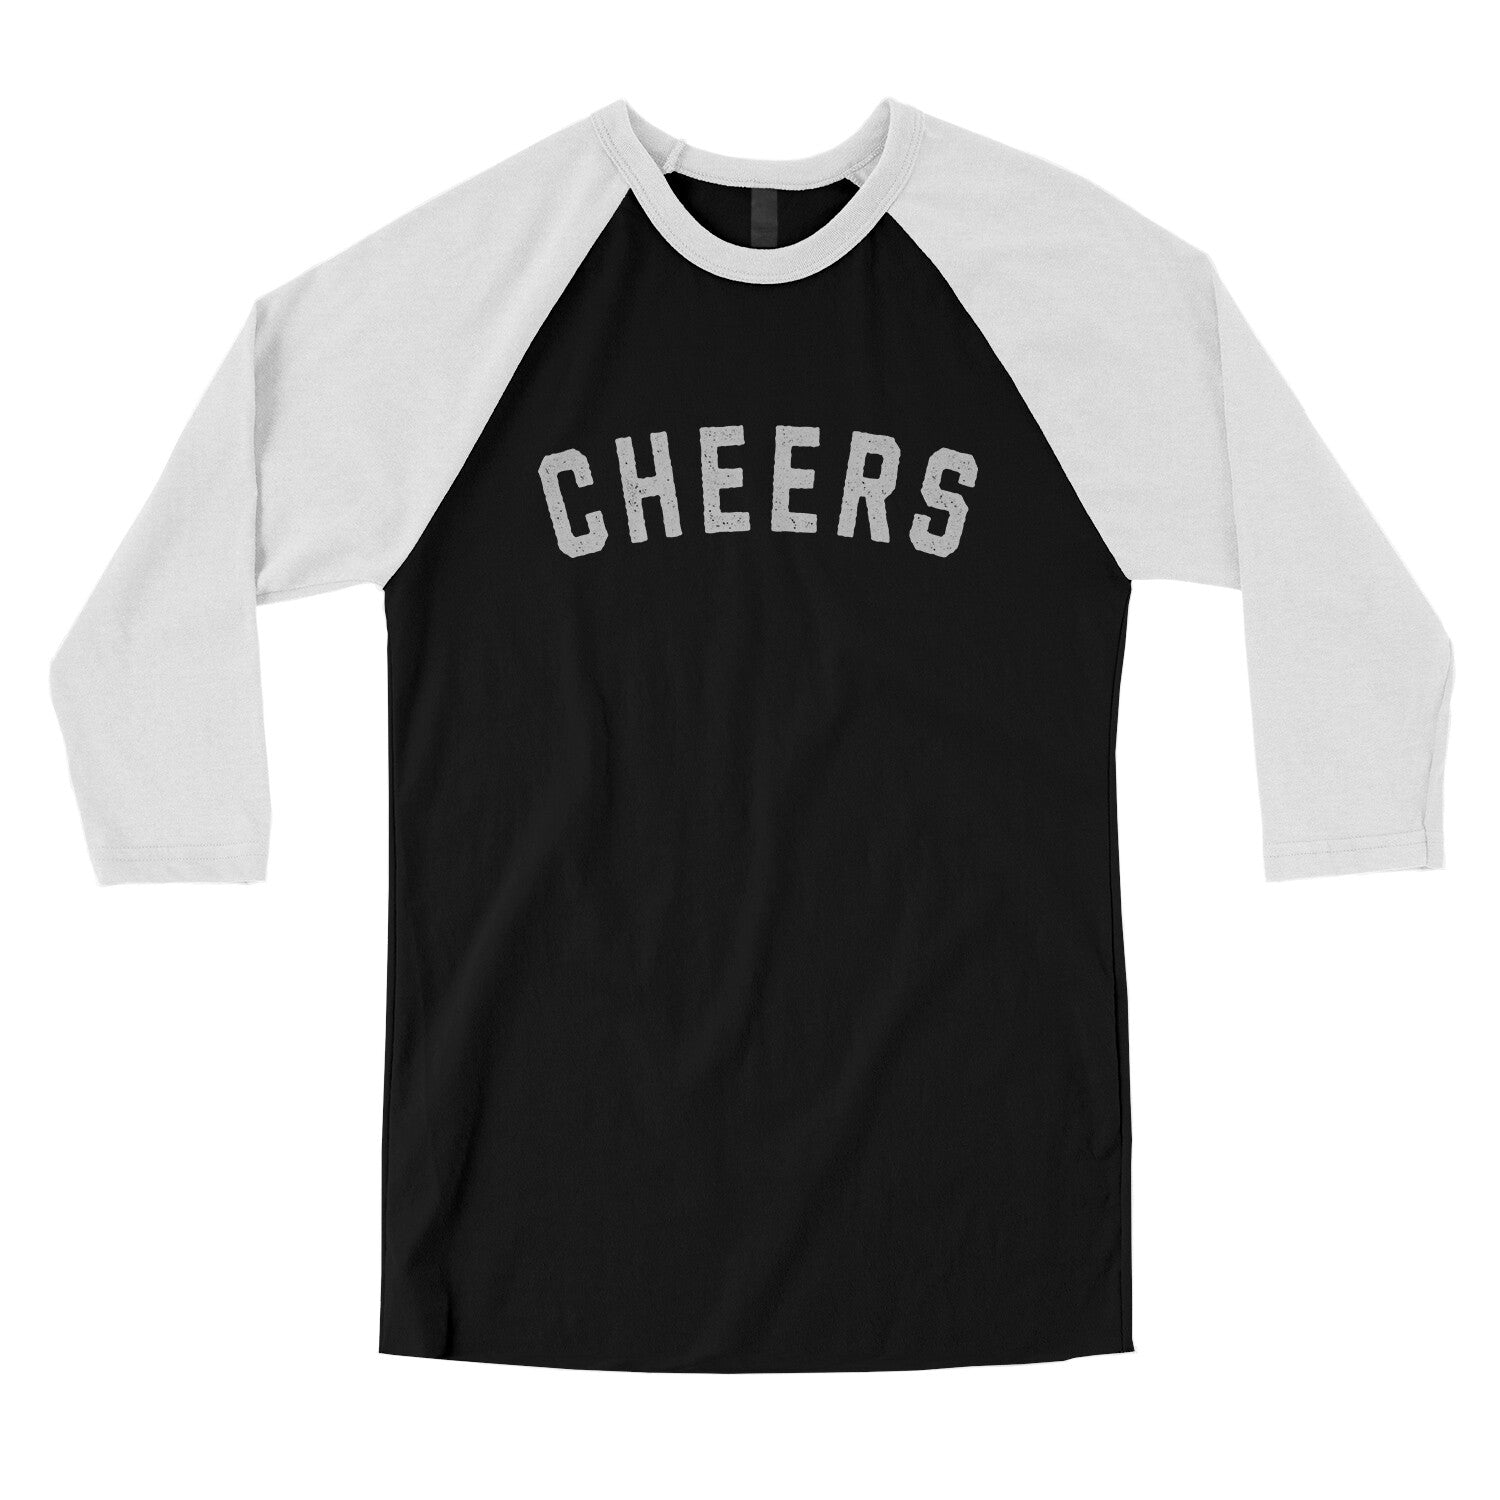 Cheers in Black with White Color